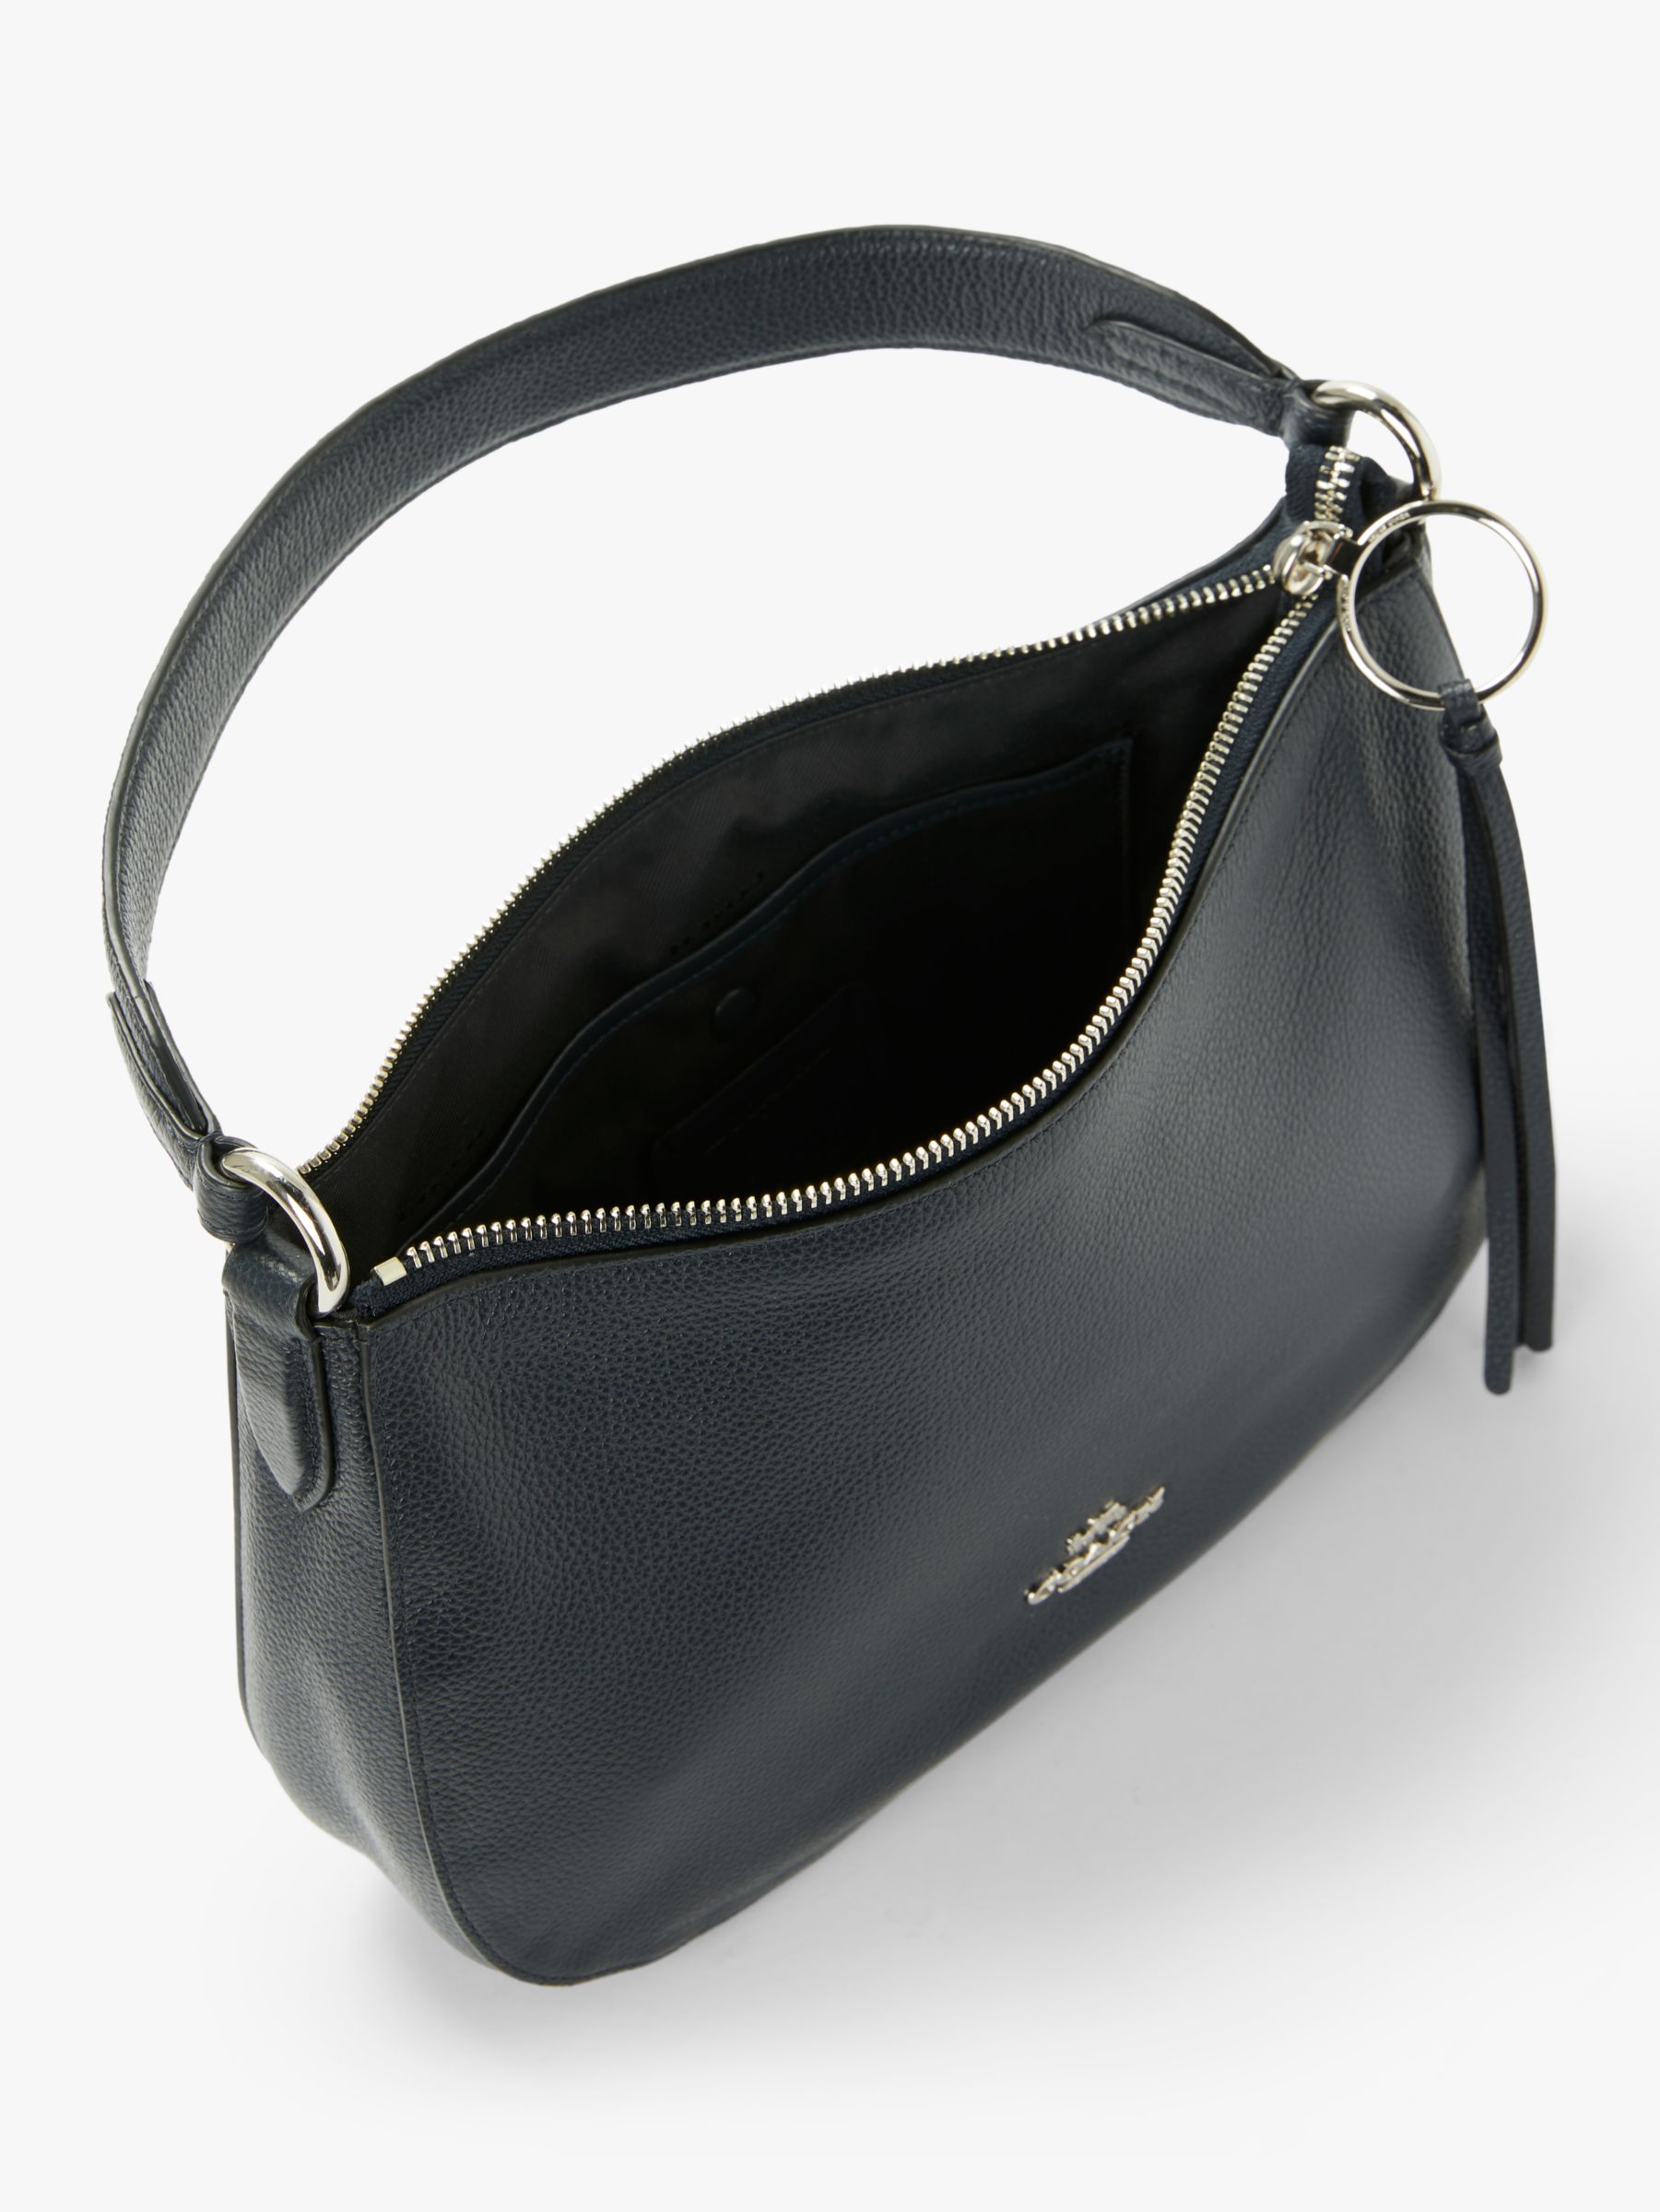 Coach Sutton Leather Cross Body Bag, Navy at John Lewis & Partners